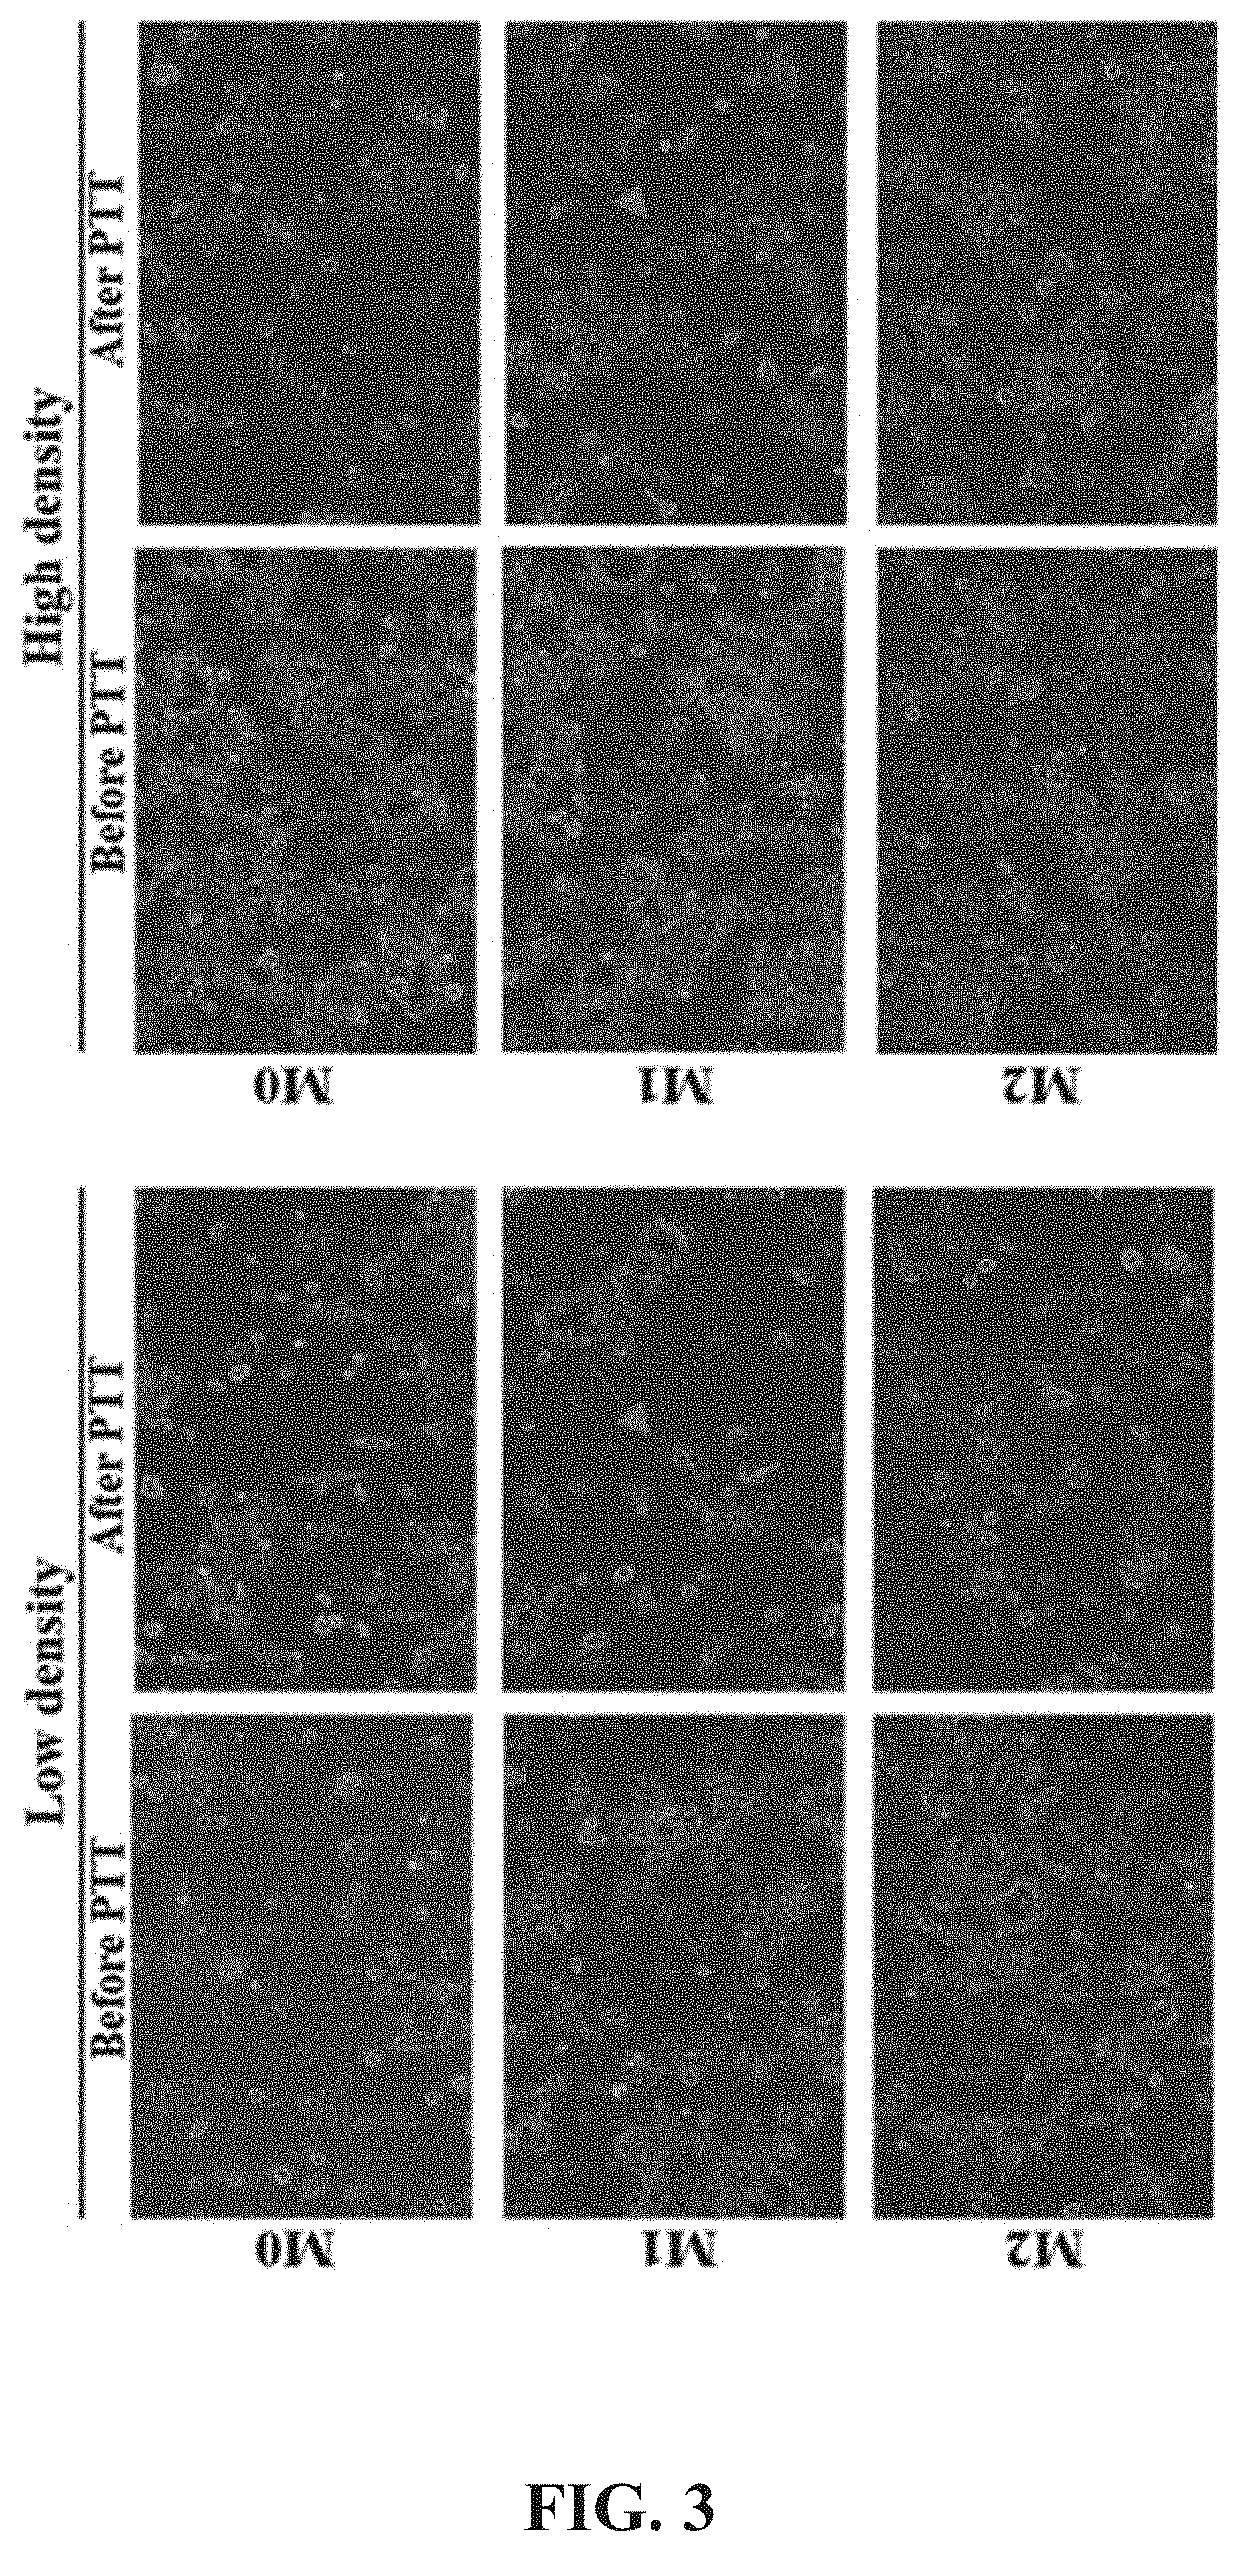 Cancer cell-targeted drug delivery carrier and composition for promoting photo-thermal treatment effects, both of which contain m1 macrophages as active ingredient